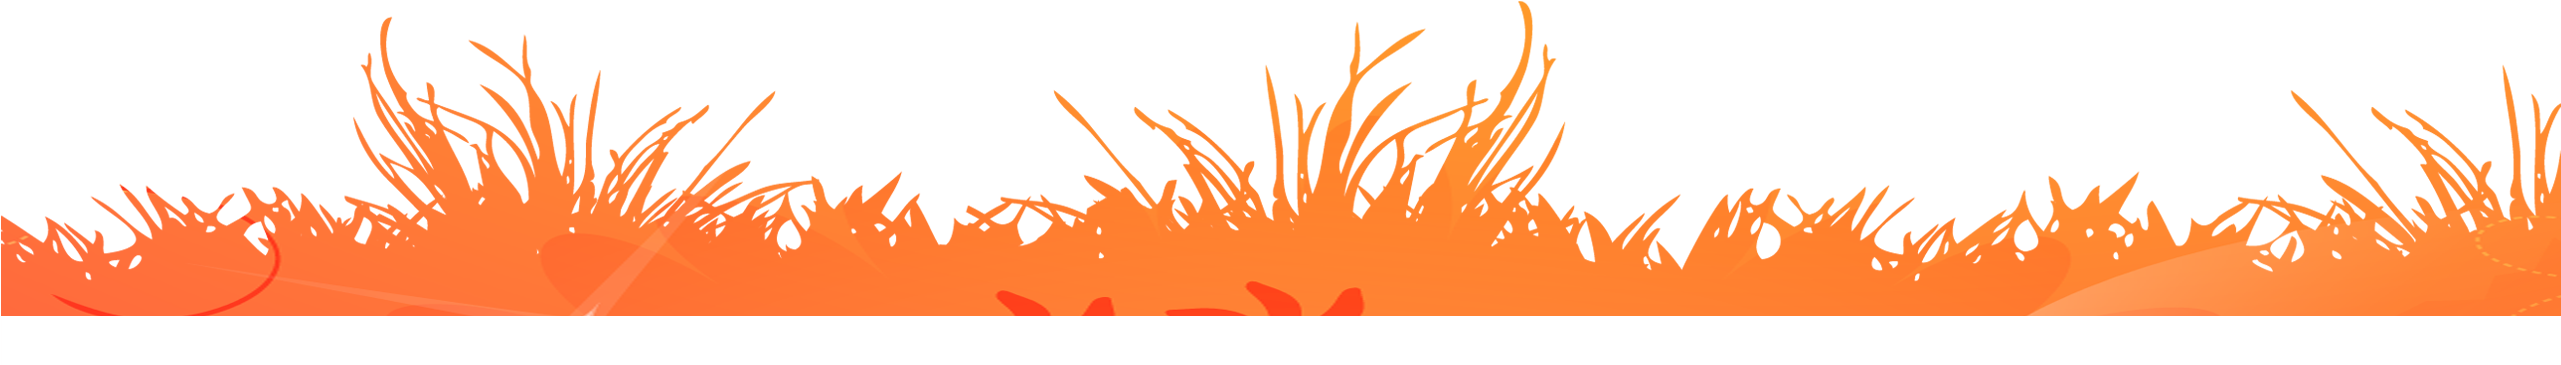 Abstract Sunrise Grass Silhouette PNG